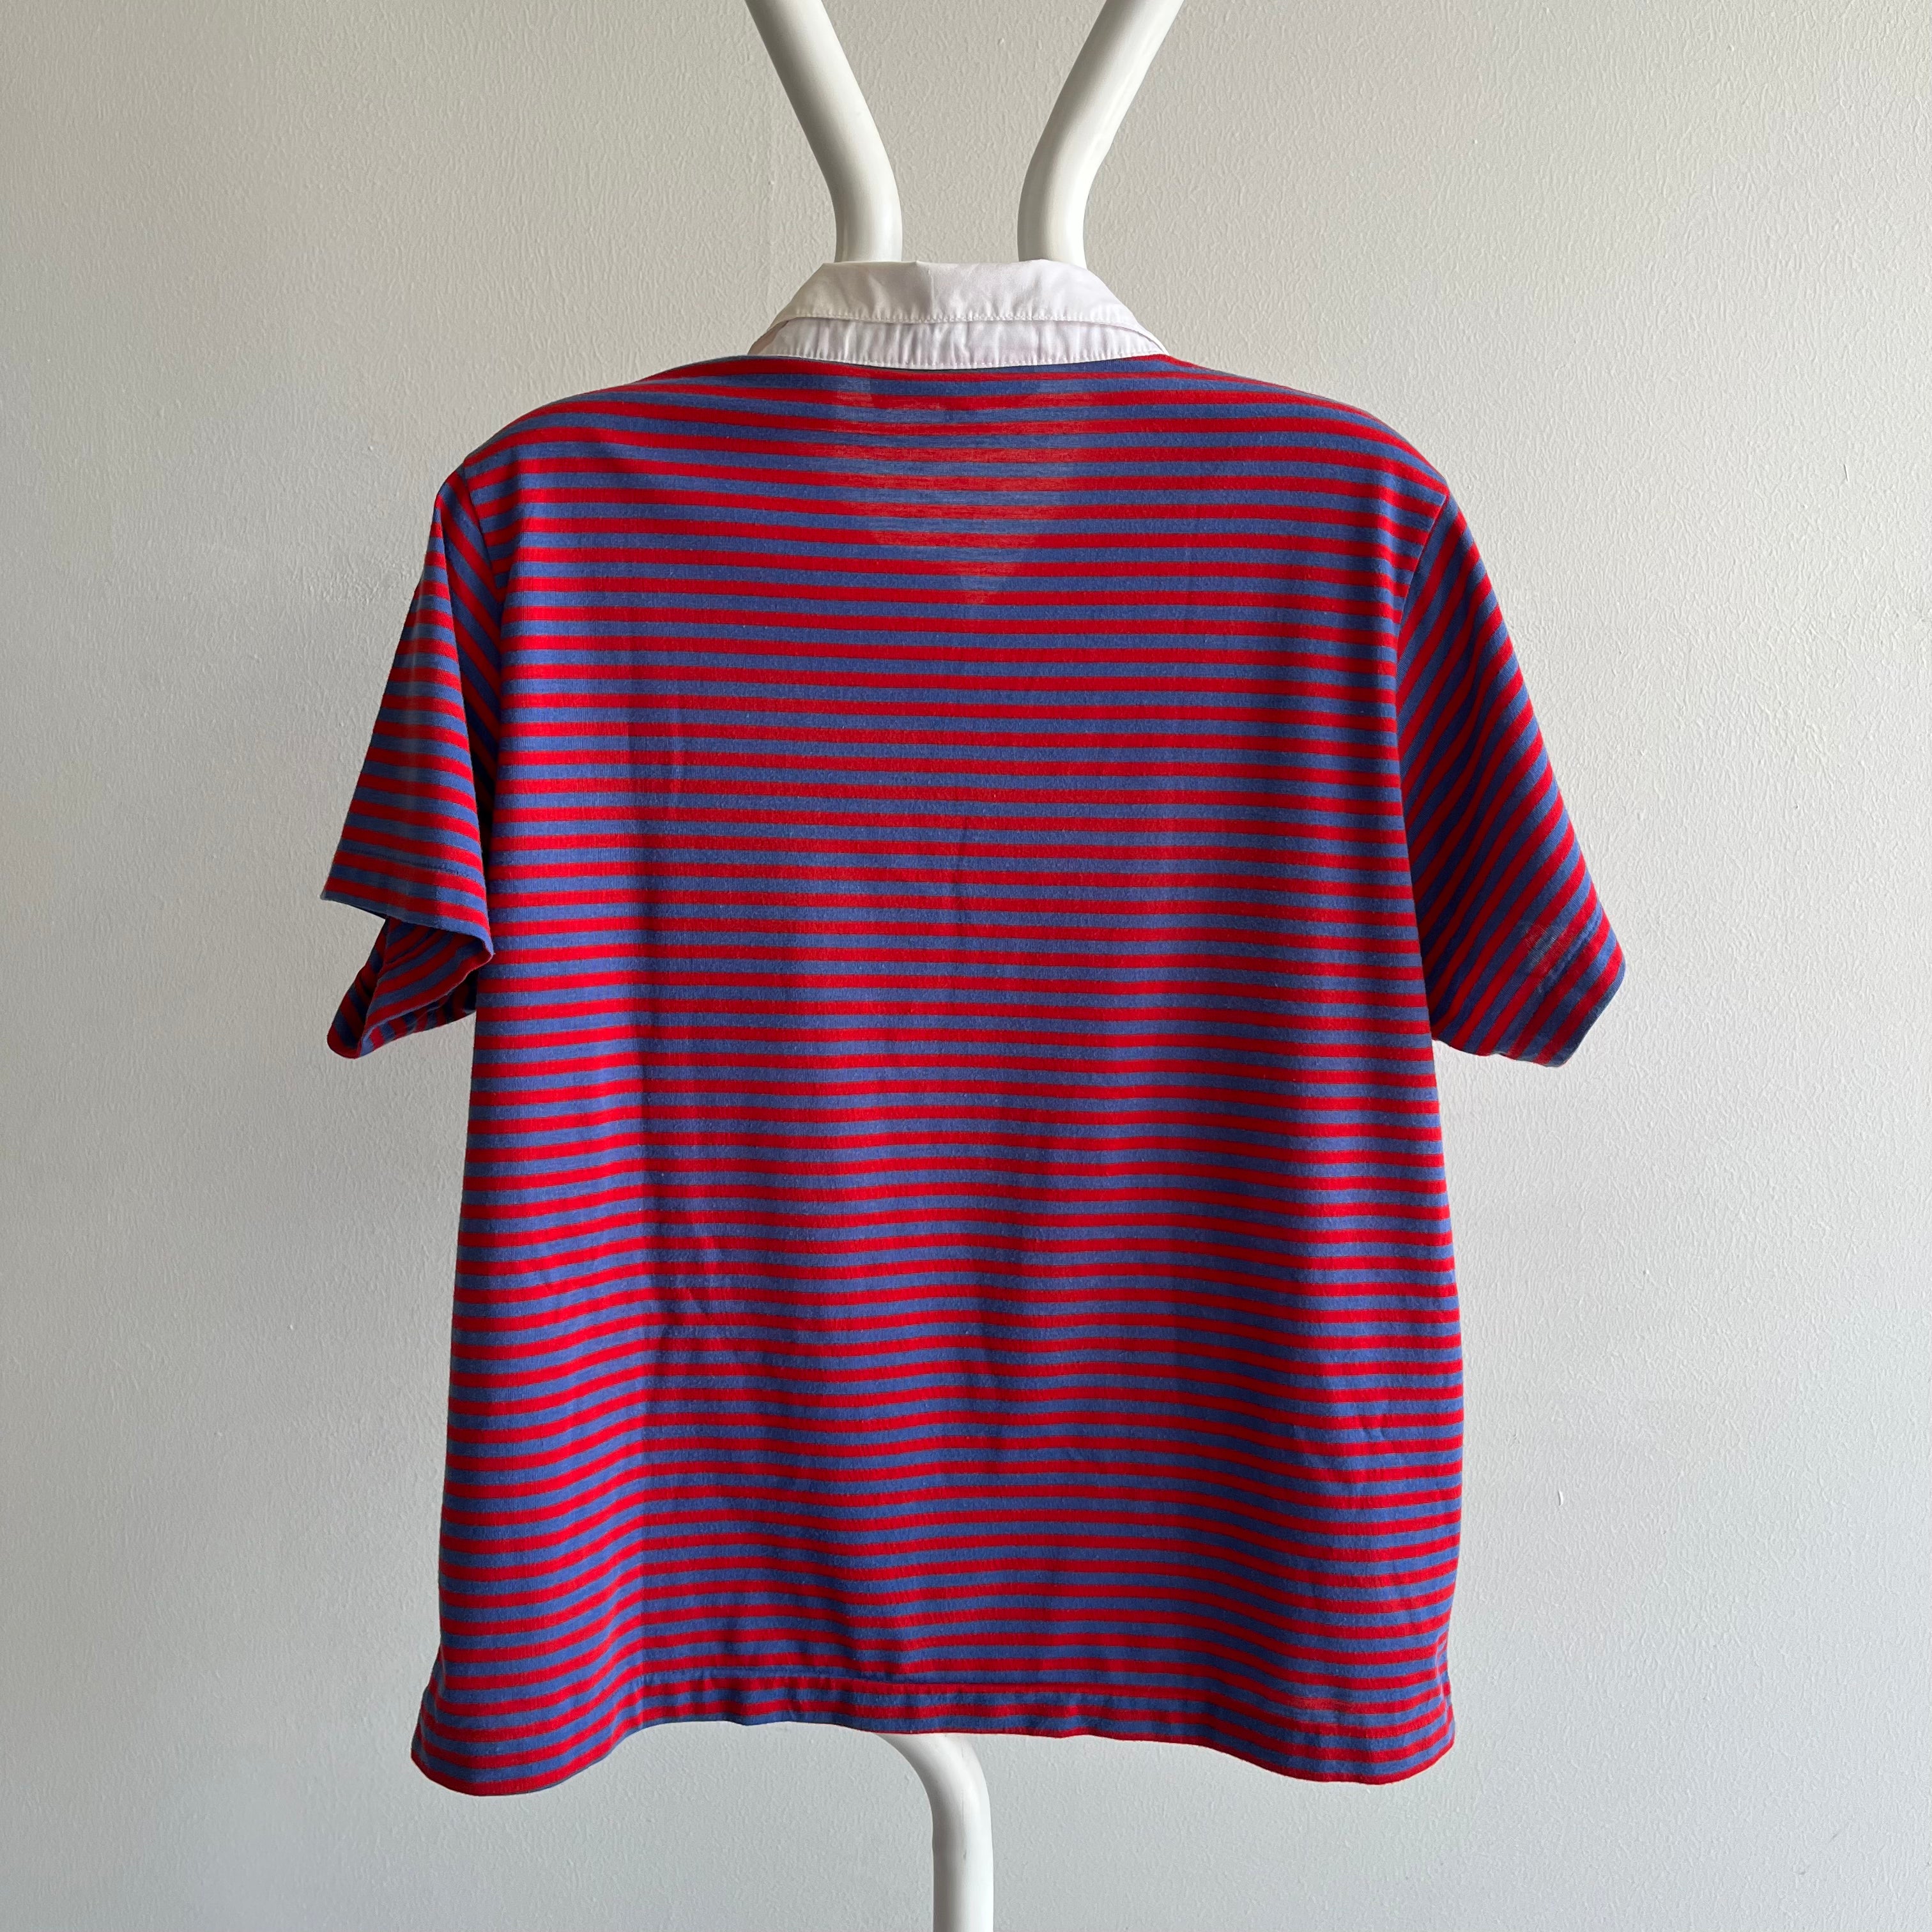 1980s Red, White and Blue Striped Polo Shirt